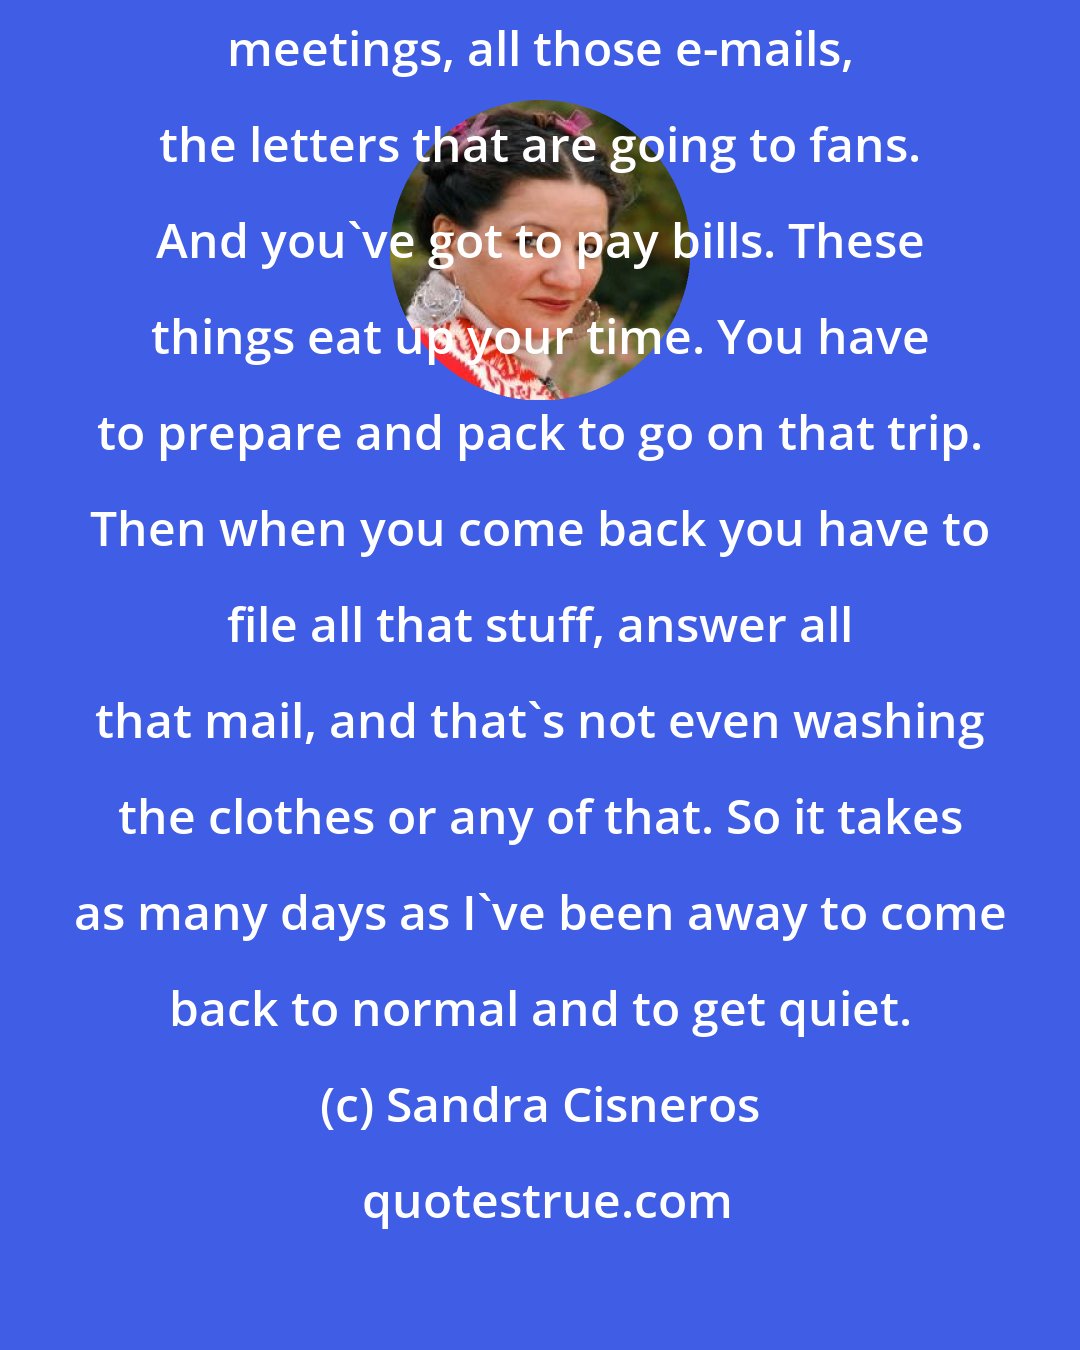 Sandra Cisneros: I have to take care of the house, and the dogs, and the Macondo Board meetings, all those e-mails, the letters that are going to fans. And you've got to pay bills. These things eat up your time. You have to prepare and pack to go on that trip. Then when you come back you have to file all that stuff, answer all that mail, and that's not even washing the clothes or any of that. So it takes as many days as I've been away to come back to normal and to get quiet.